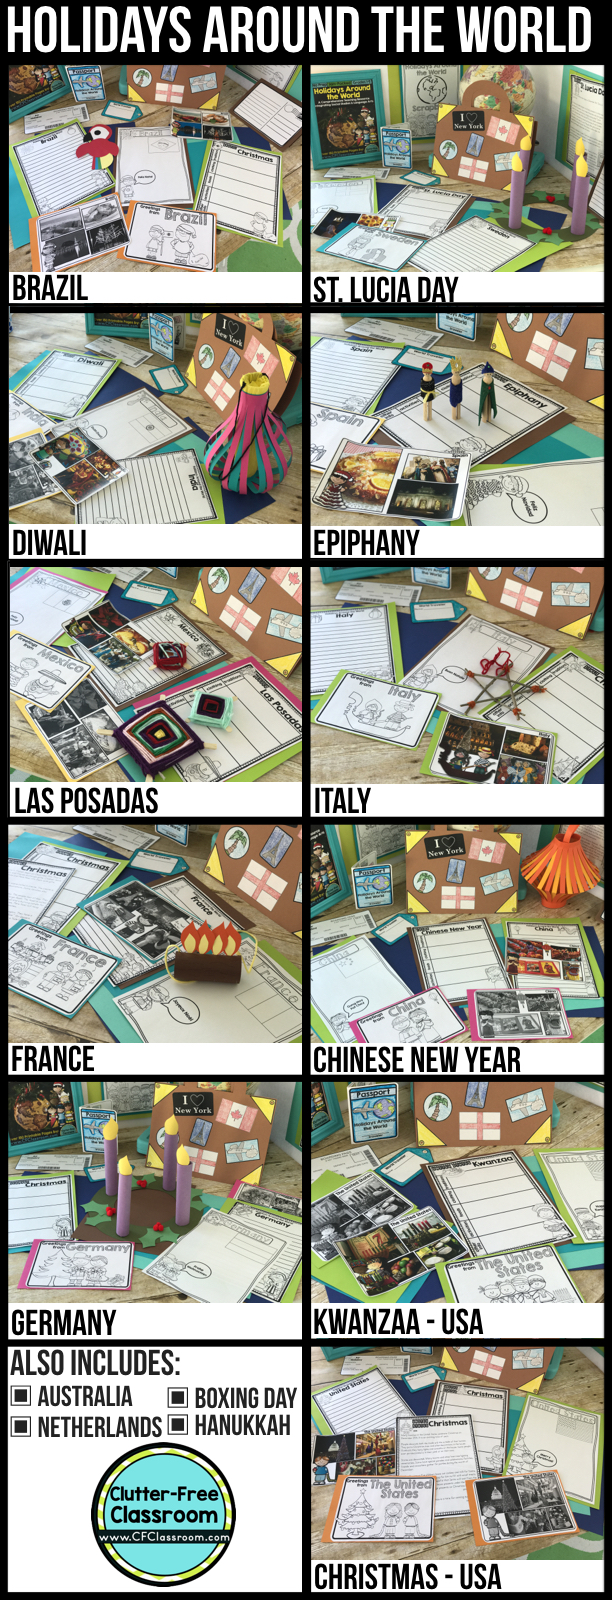 A Holidays Around the World Unit full of activities, close reads, crafts, writing, & social studies lessons for 12 countries / holidays makes learning in December fun for students. Make a passport, suitcase, & map to track travel. Learn about cultures through books, art, & videos. Clutter-Free Classroom has created printables to use as is or in interactive notebooks & lap books. Christmas Around the World is perfect for kids in 1st, 2nd, 3rd, 4th, 5th & Homeschool.